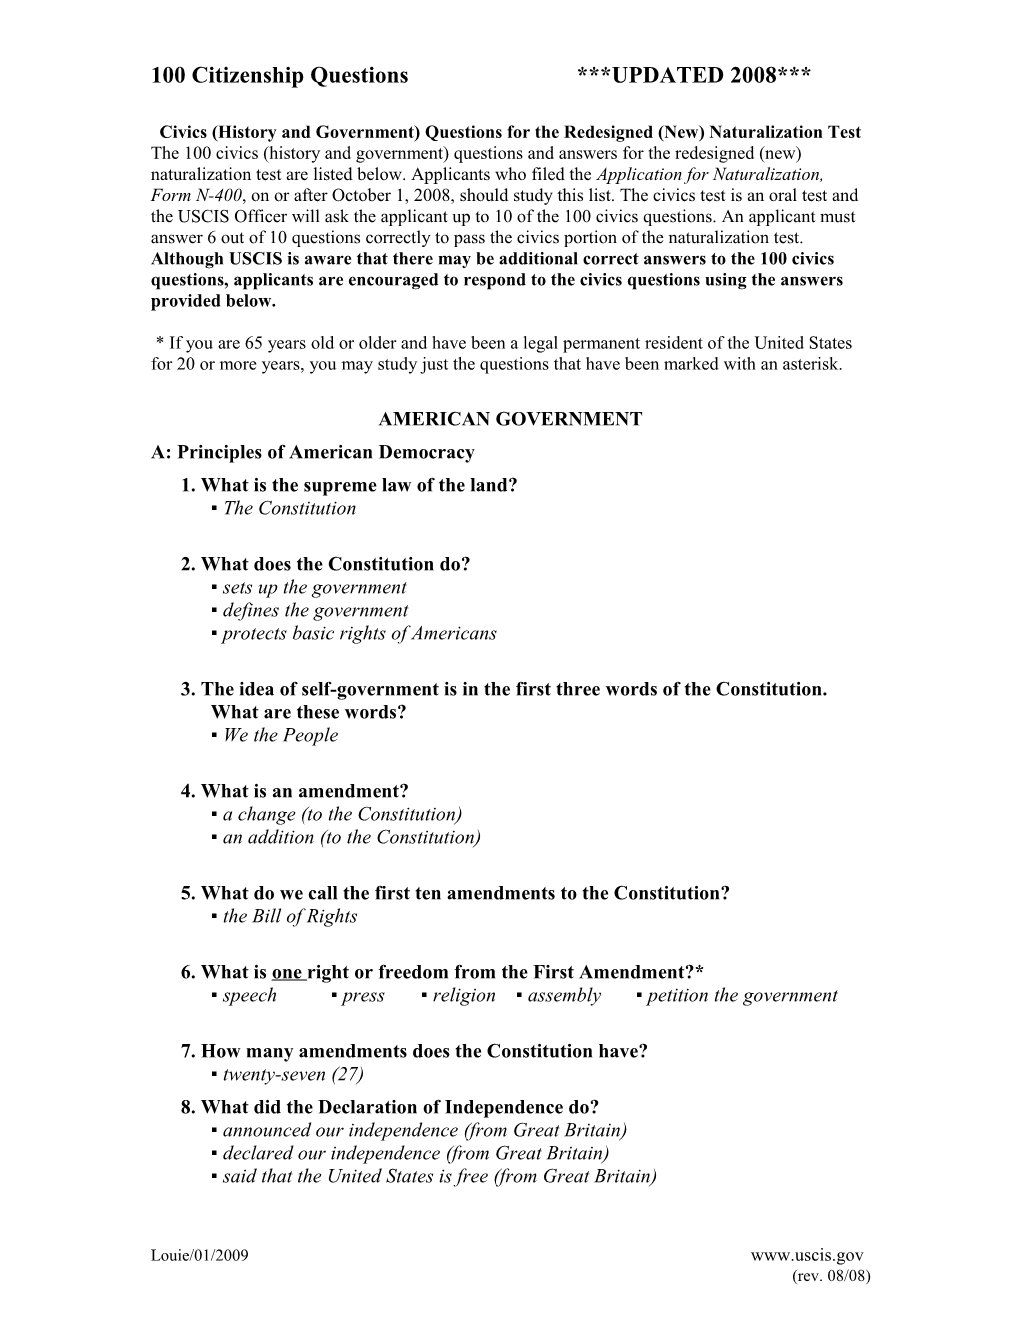 Civics (History And Government) Questions For The Redesigned (New) Naturalization Test